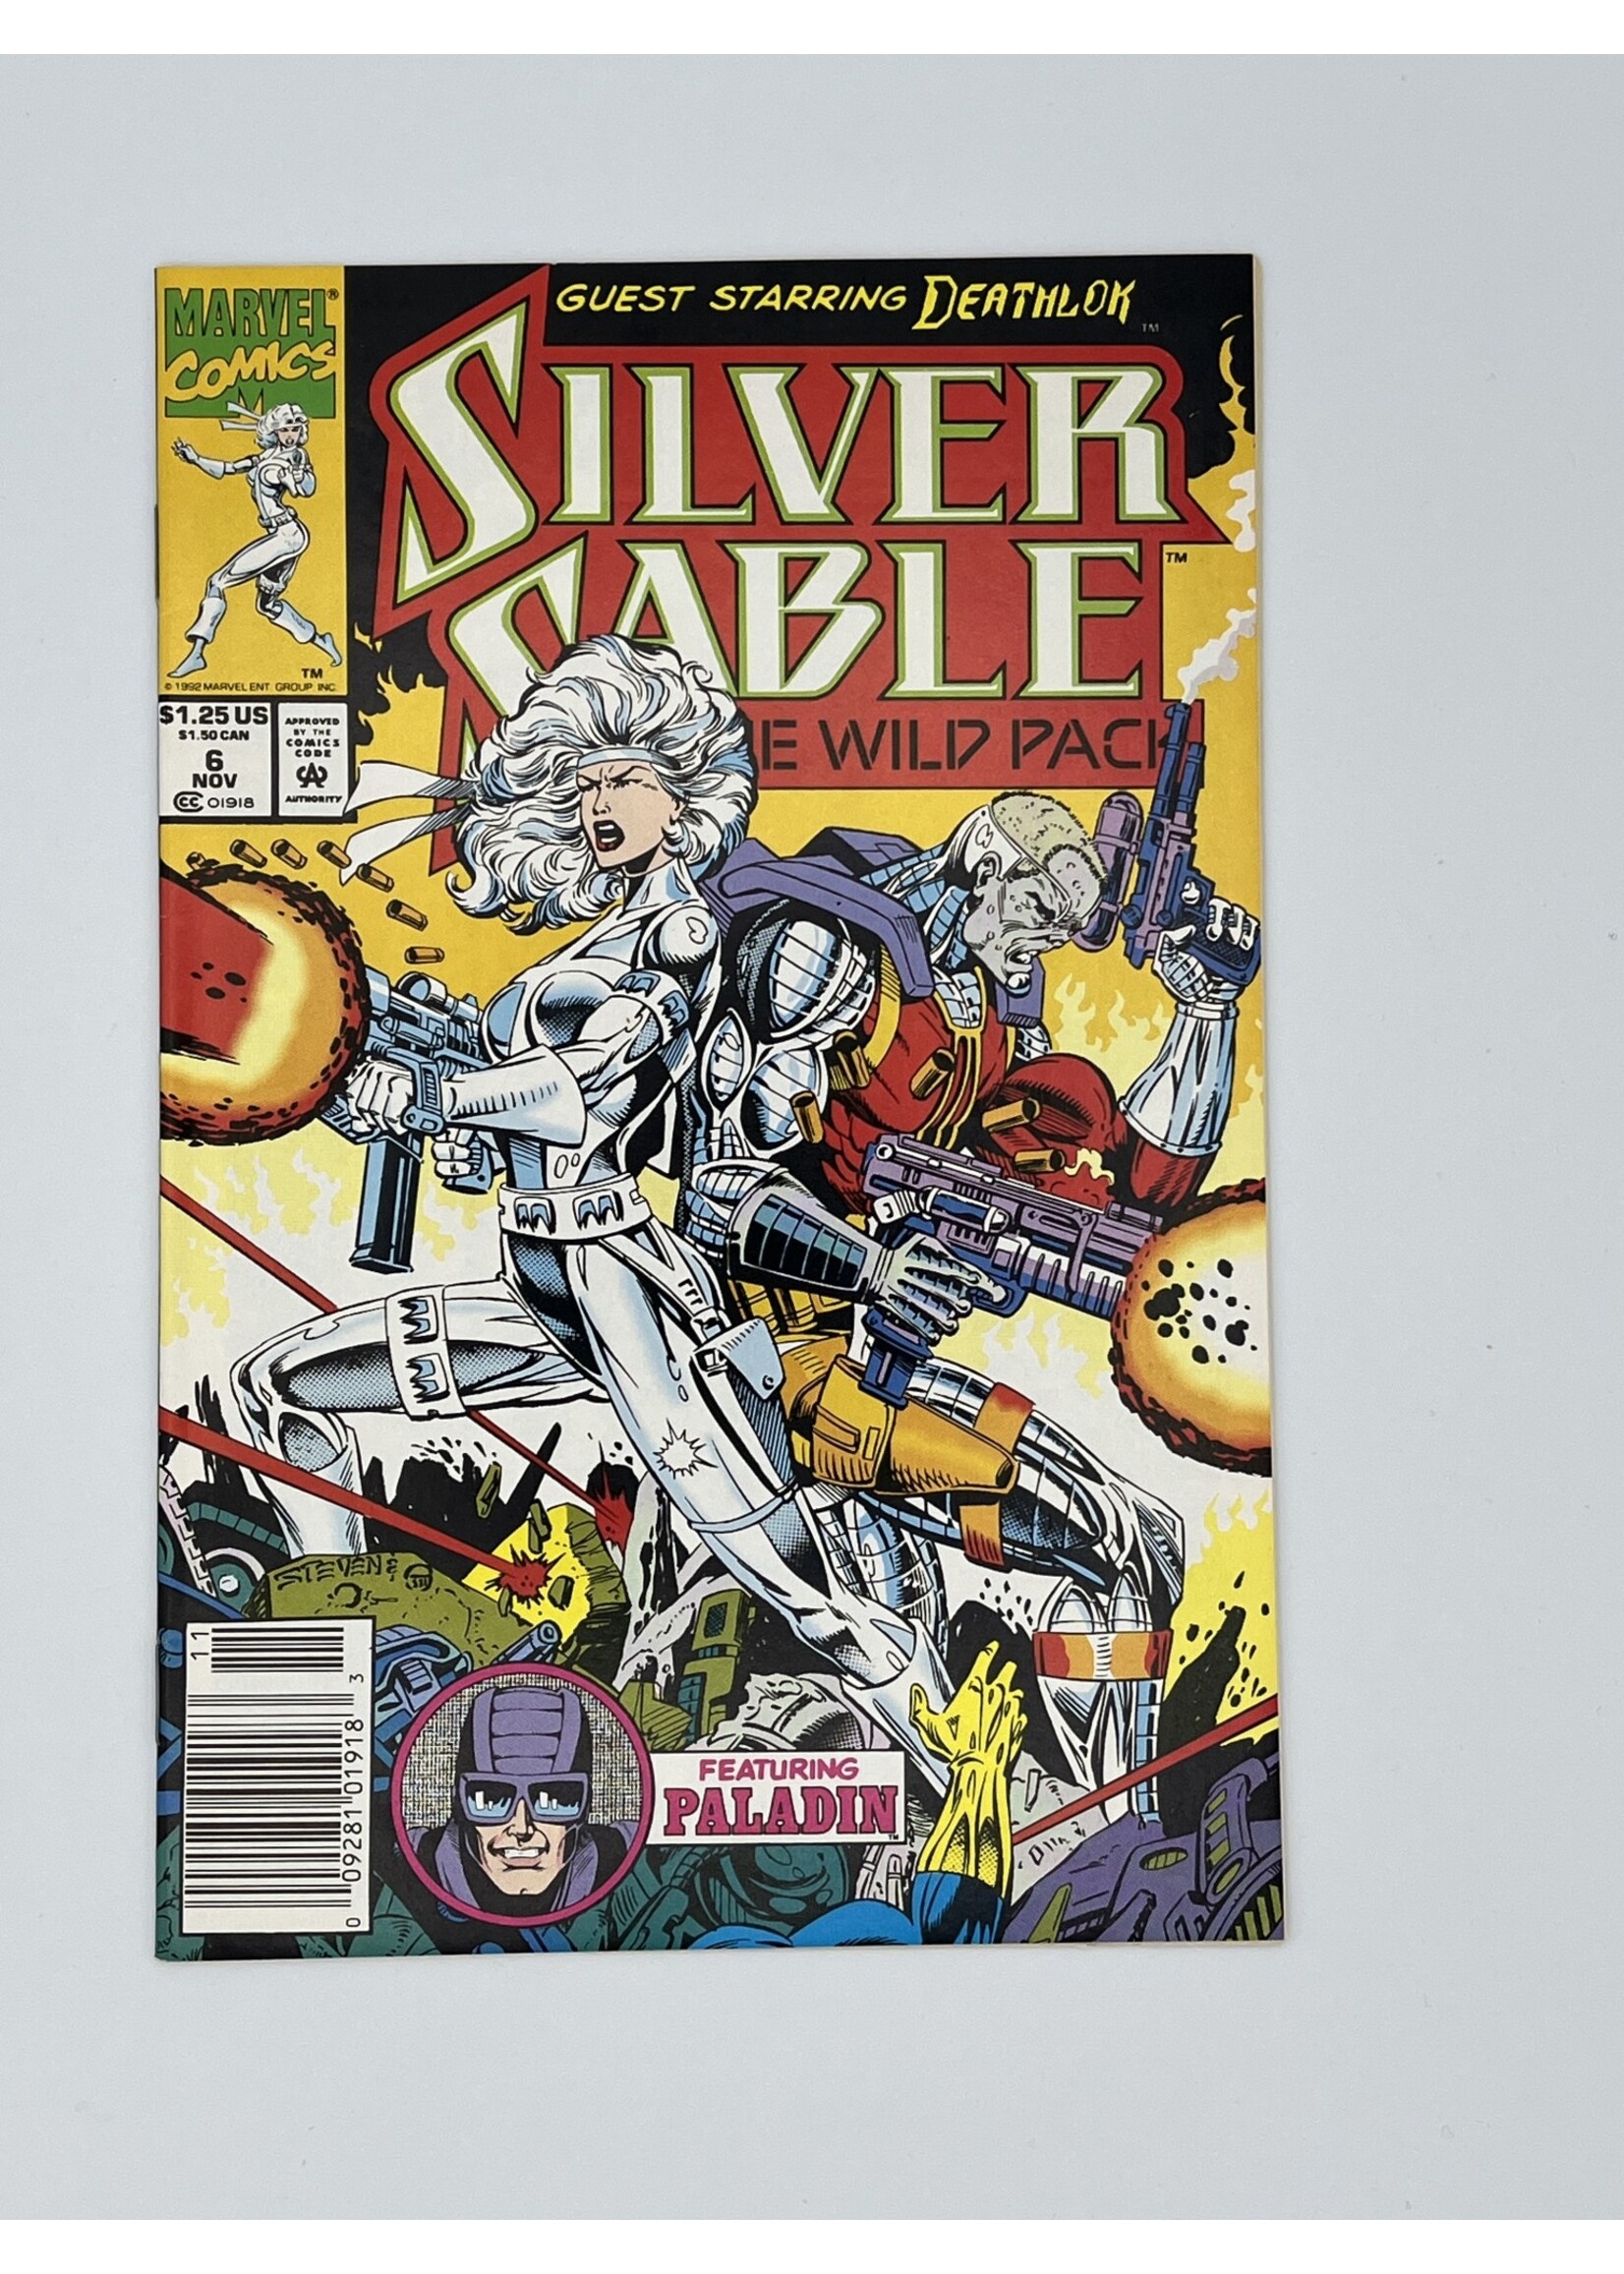 Marvel SILVER SABLE And THE WILD PACK #6 Marvel November 1992